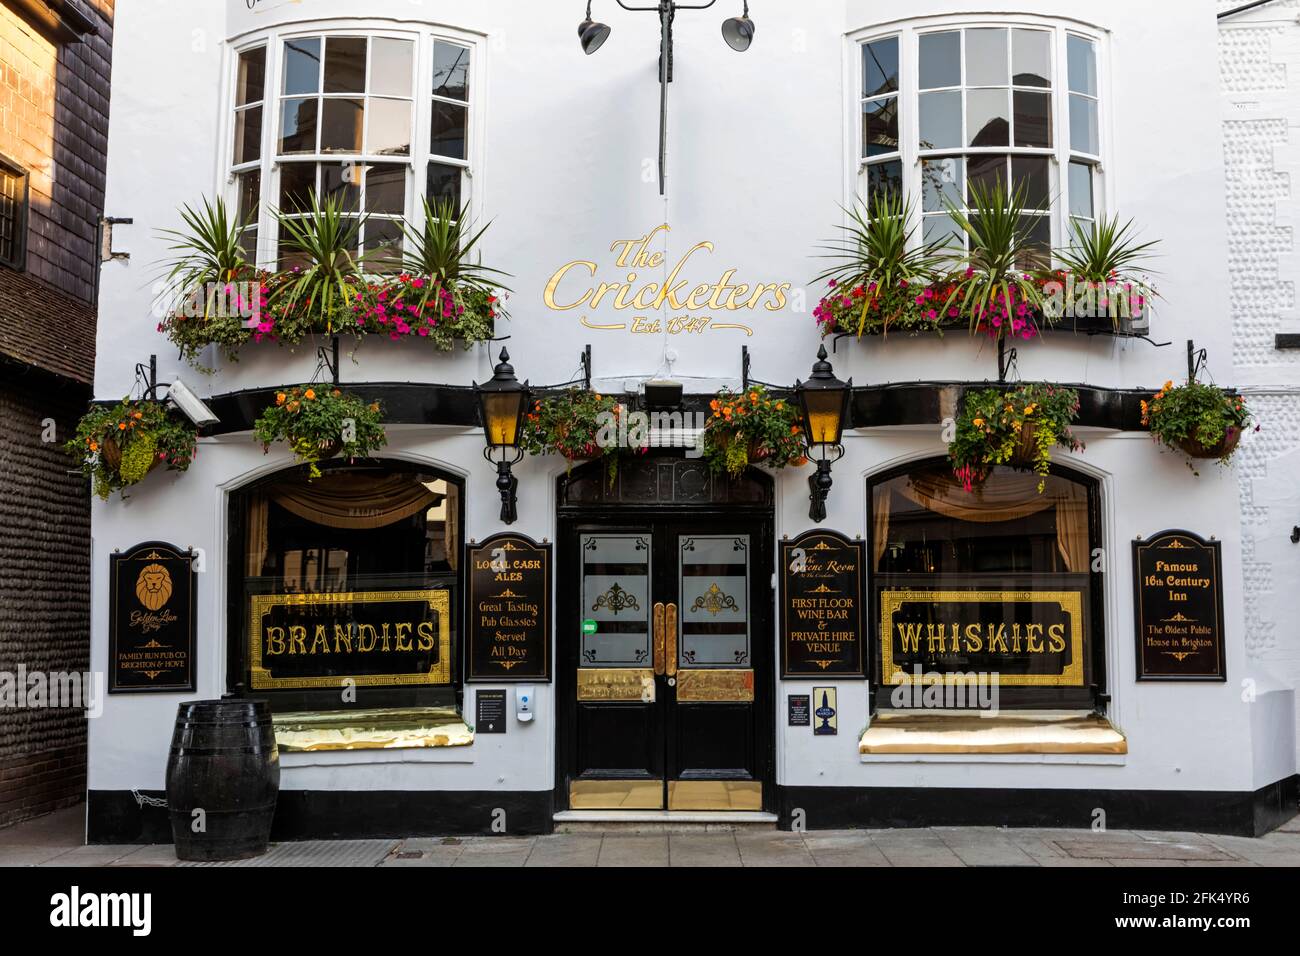 England, East Sussex, Brighton, The Lanes, The Cricketers Pub *** Local Caption ***  UK,United Kingdom,Great Britain,Britain,England,British,English,E Stock Photo